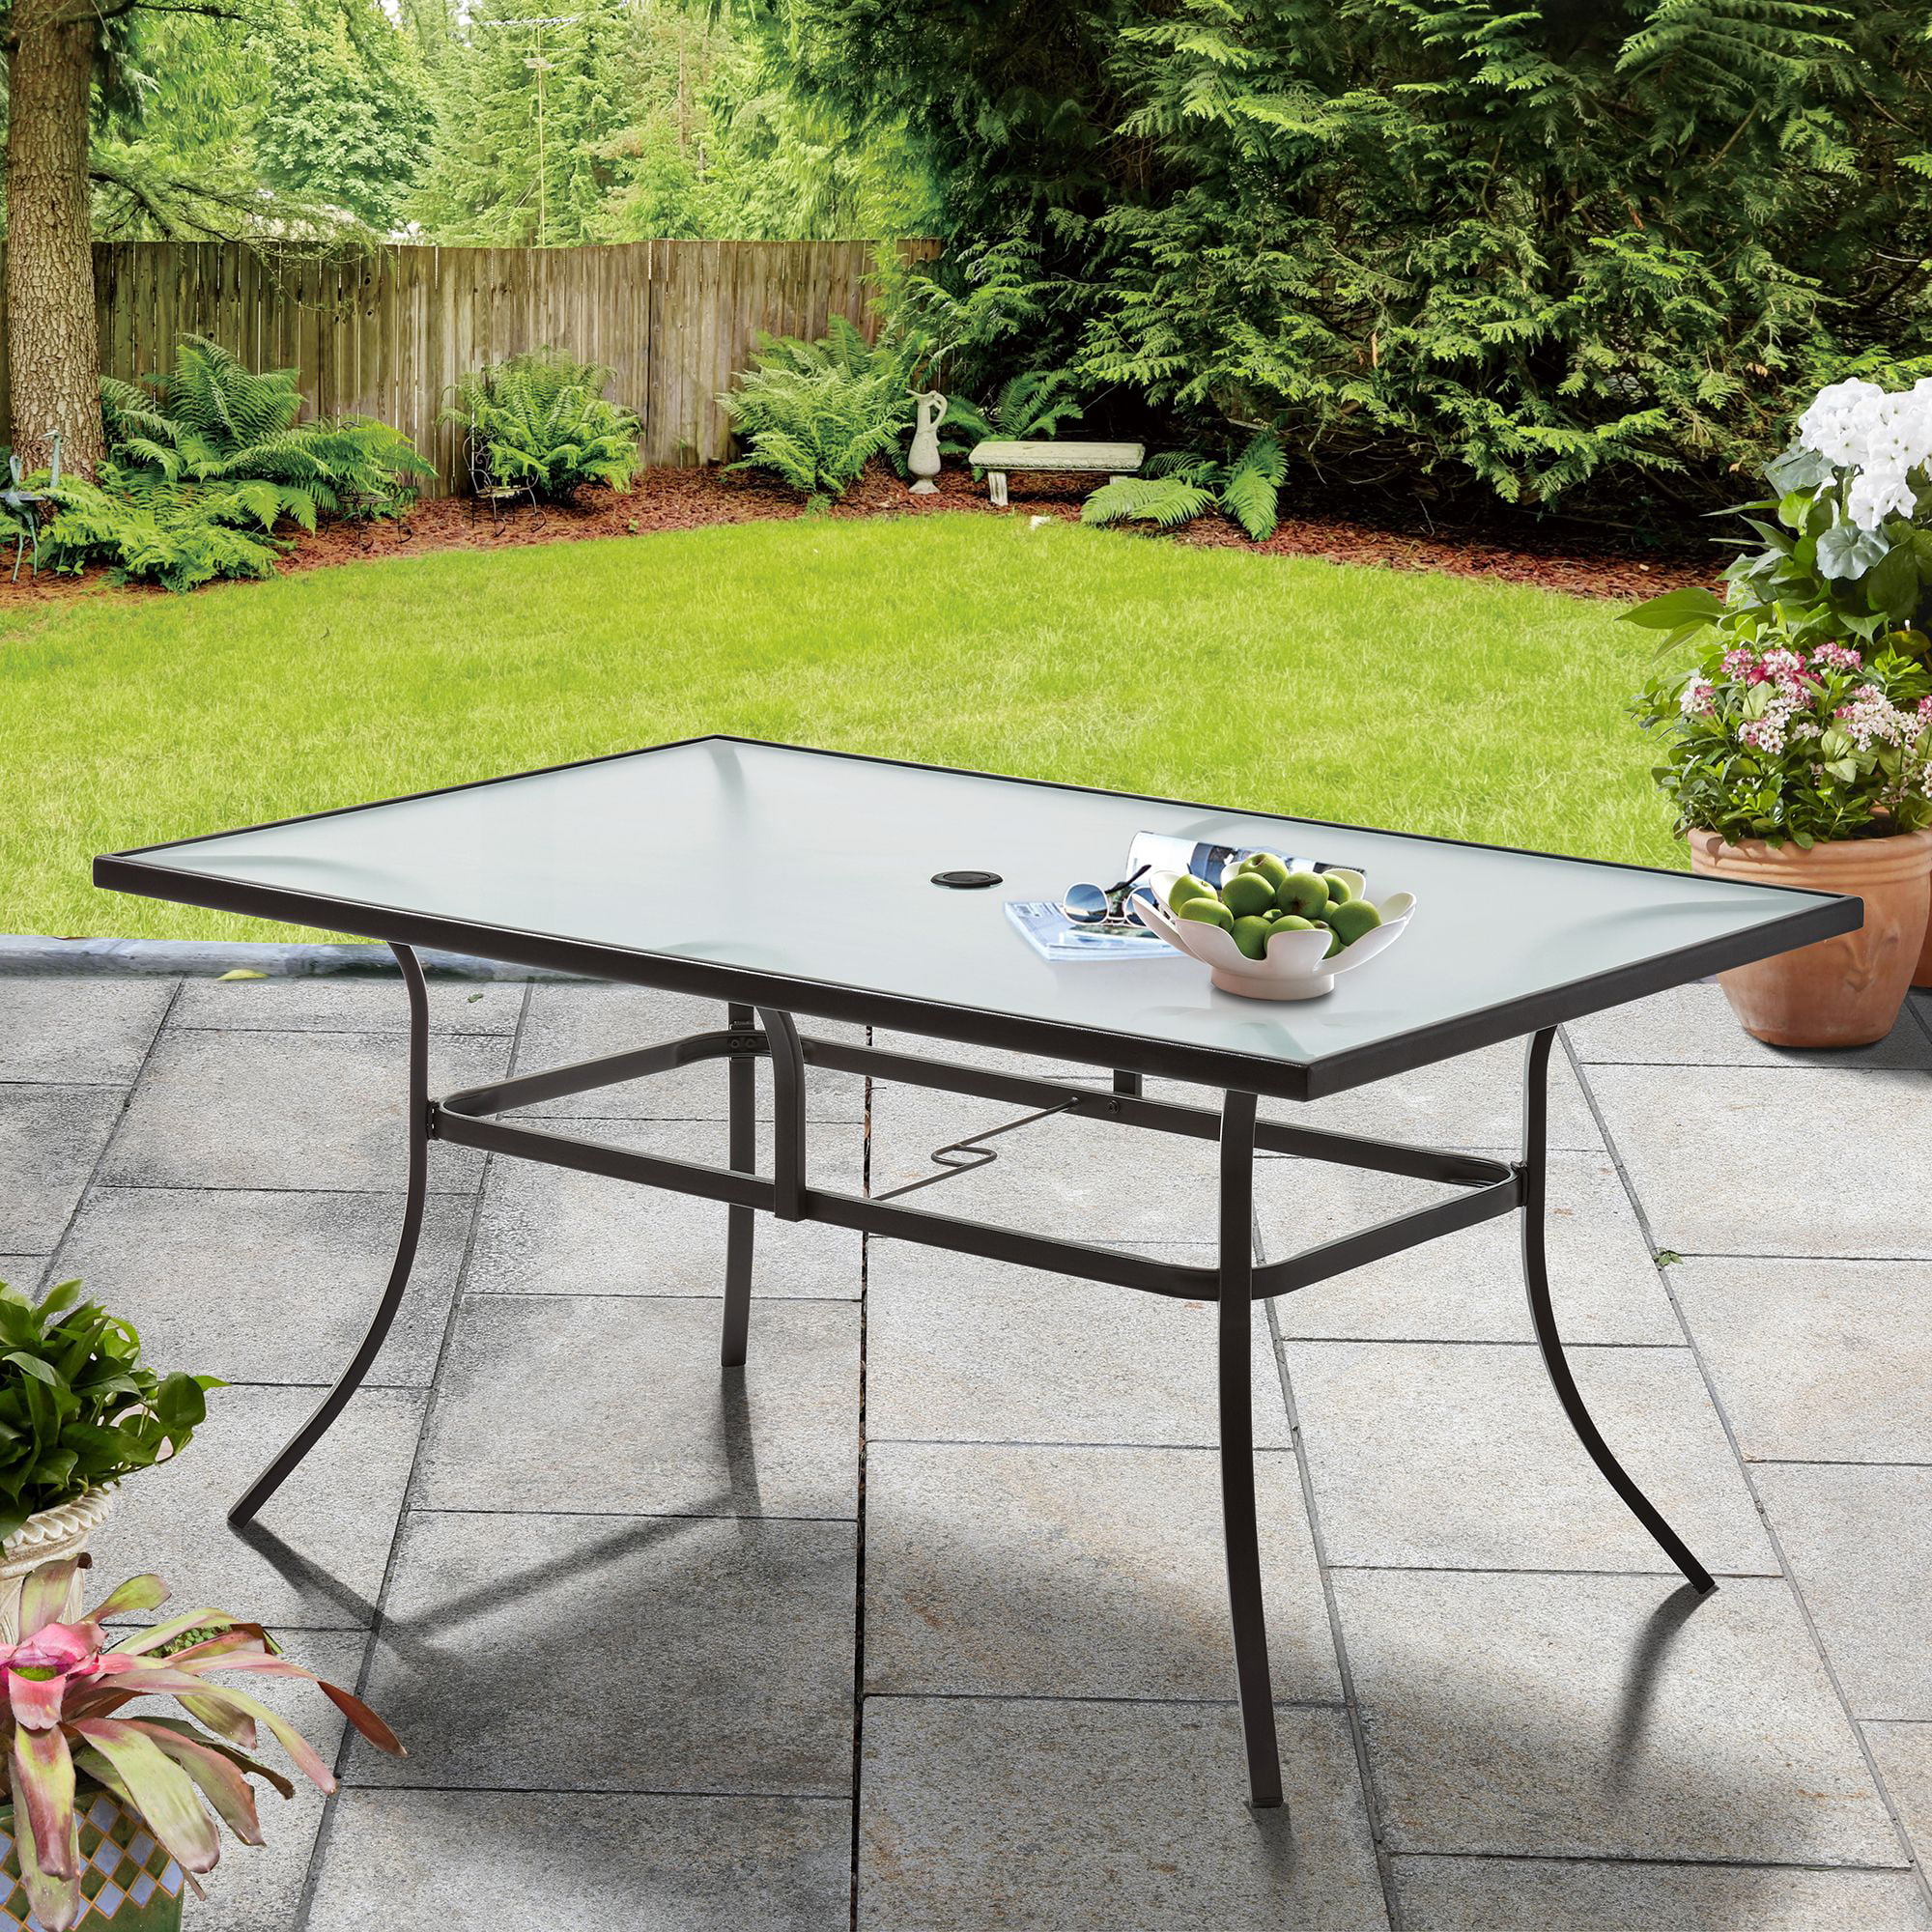 Mainstays Heritage Park Outdoor Rectangle Patio Dining Table, Brown